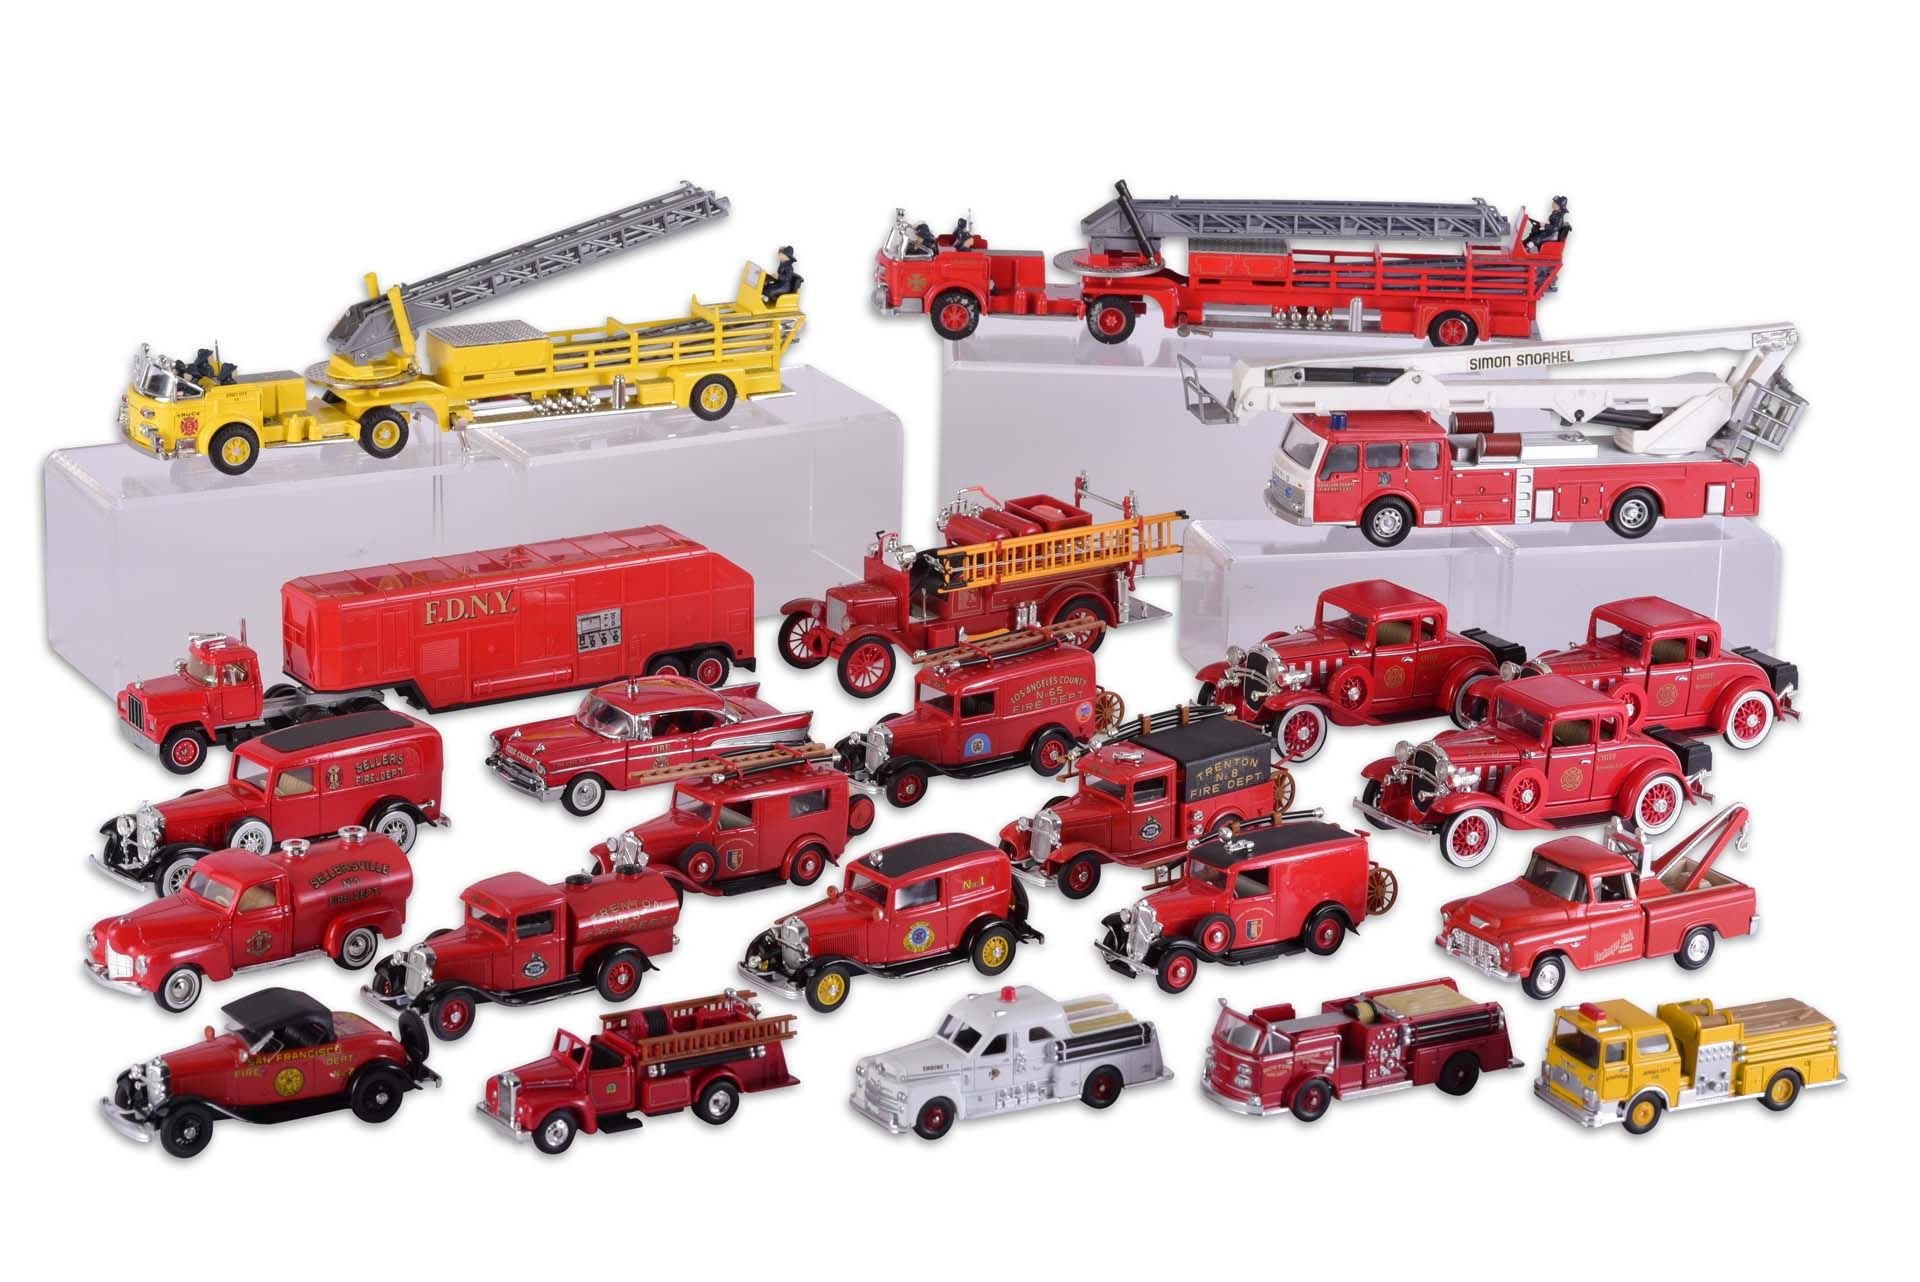 For Sale Group of Firetruck Toy Cars